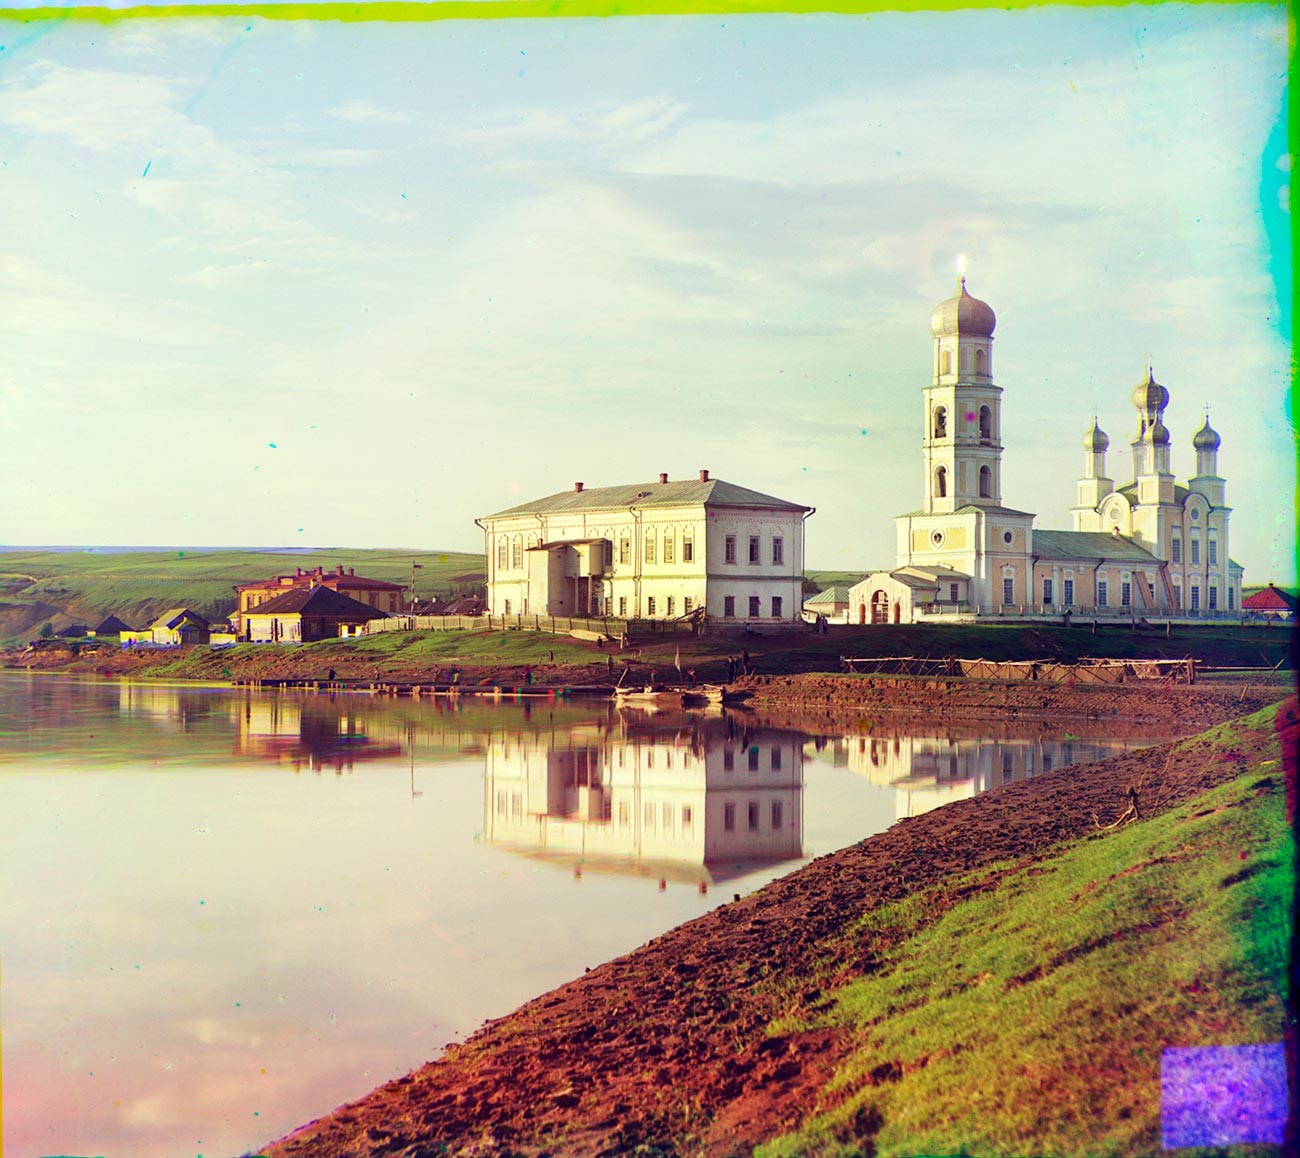 Upper Chusovskaya Gorodki (now submerged in Kama Reservoir). Church of the Nativity of Christ, southwest view. Foreground: early 18th-c. administrative building similar to Stroganov Chambers in Usolye. Summer 1912